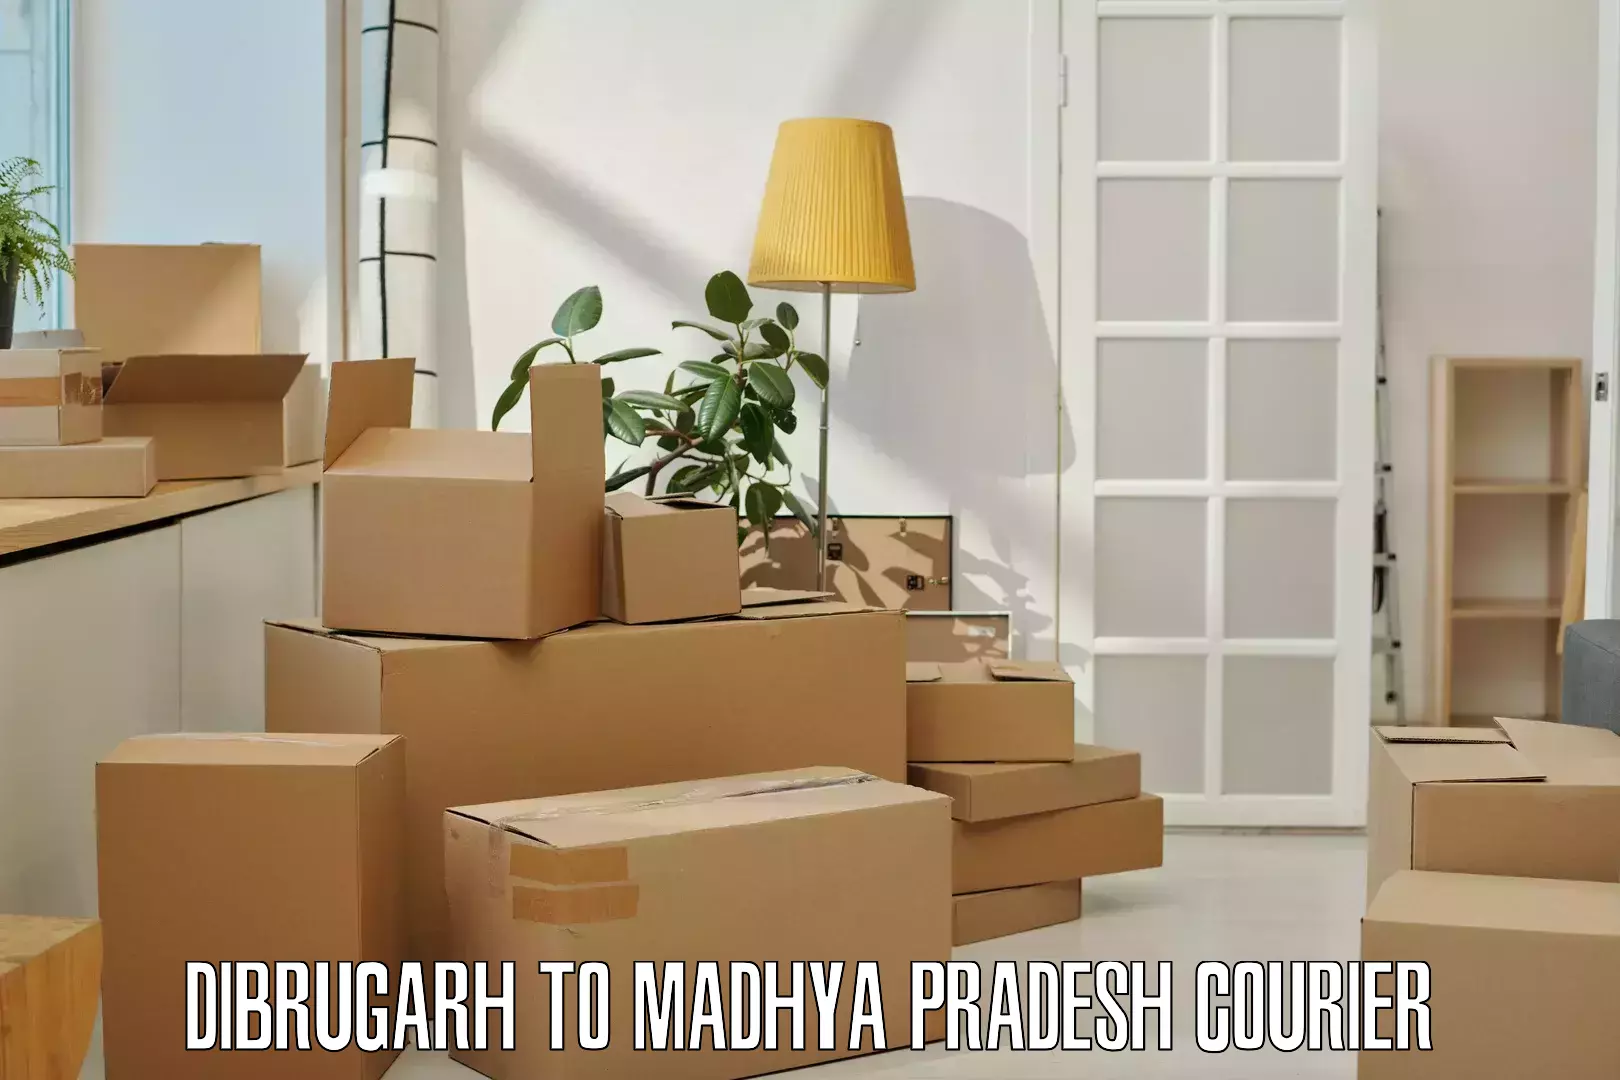 Professional courier handling Dibrugarh to Dola